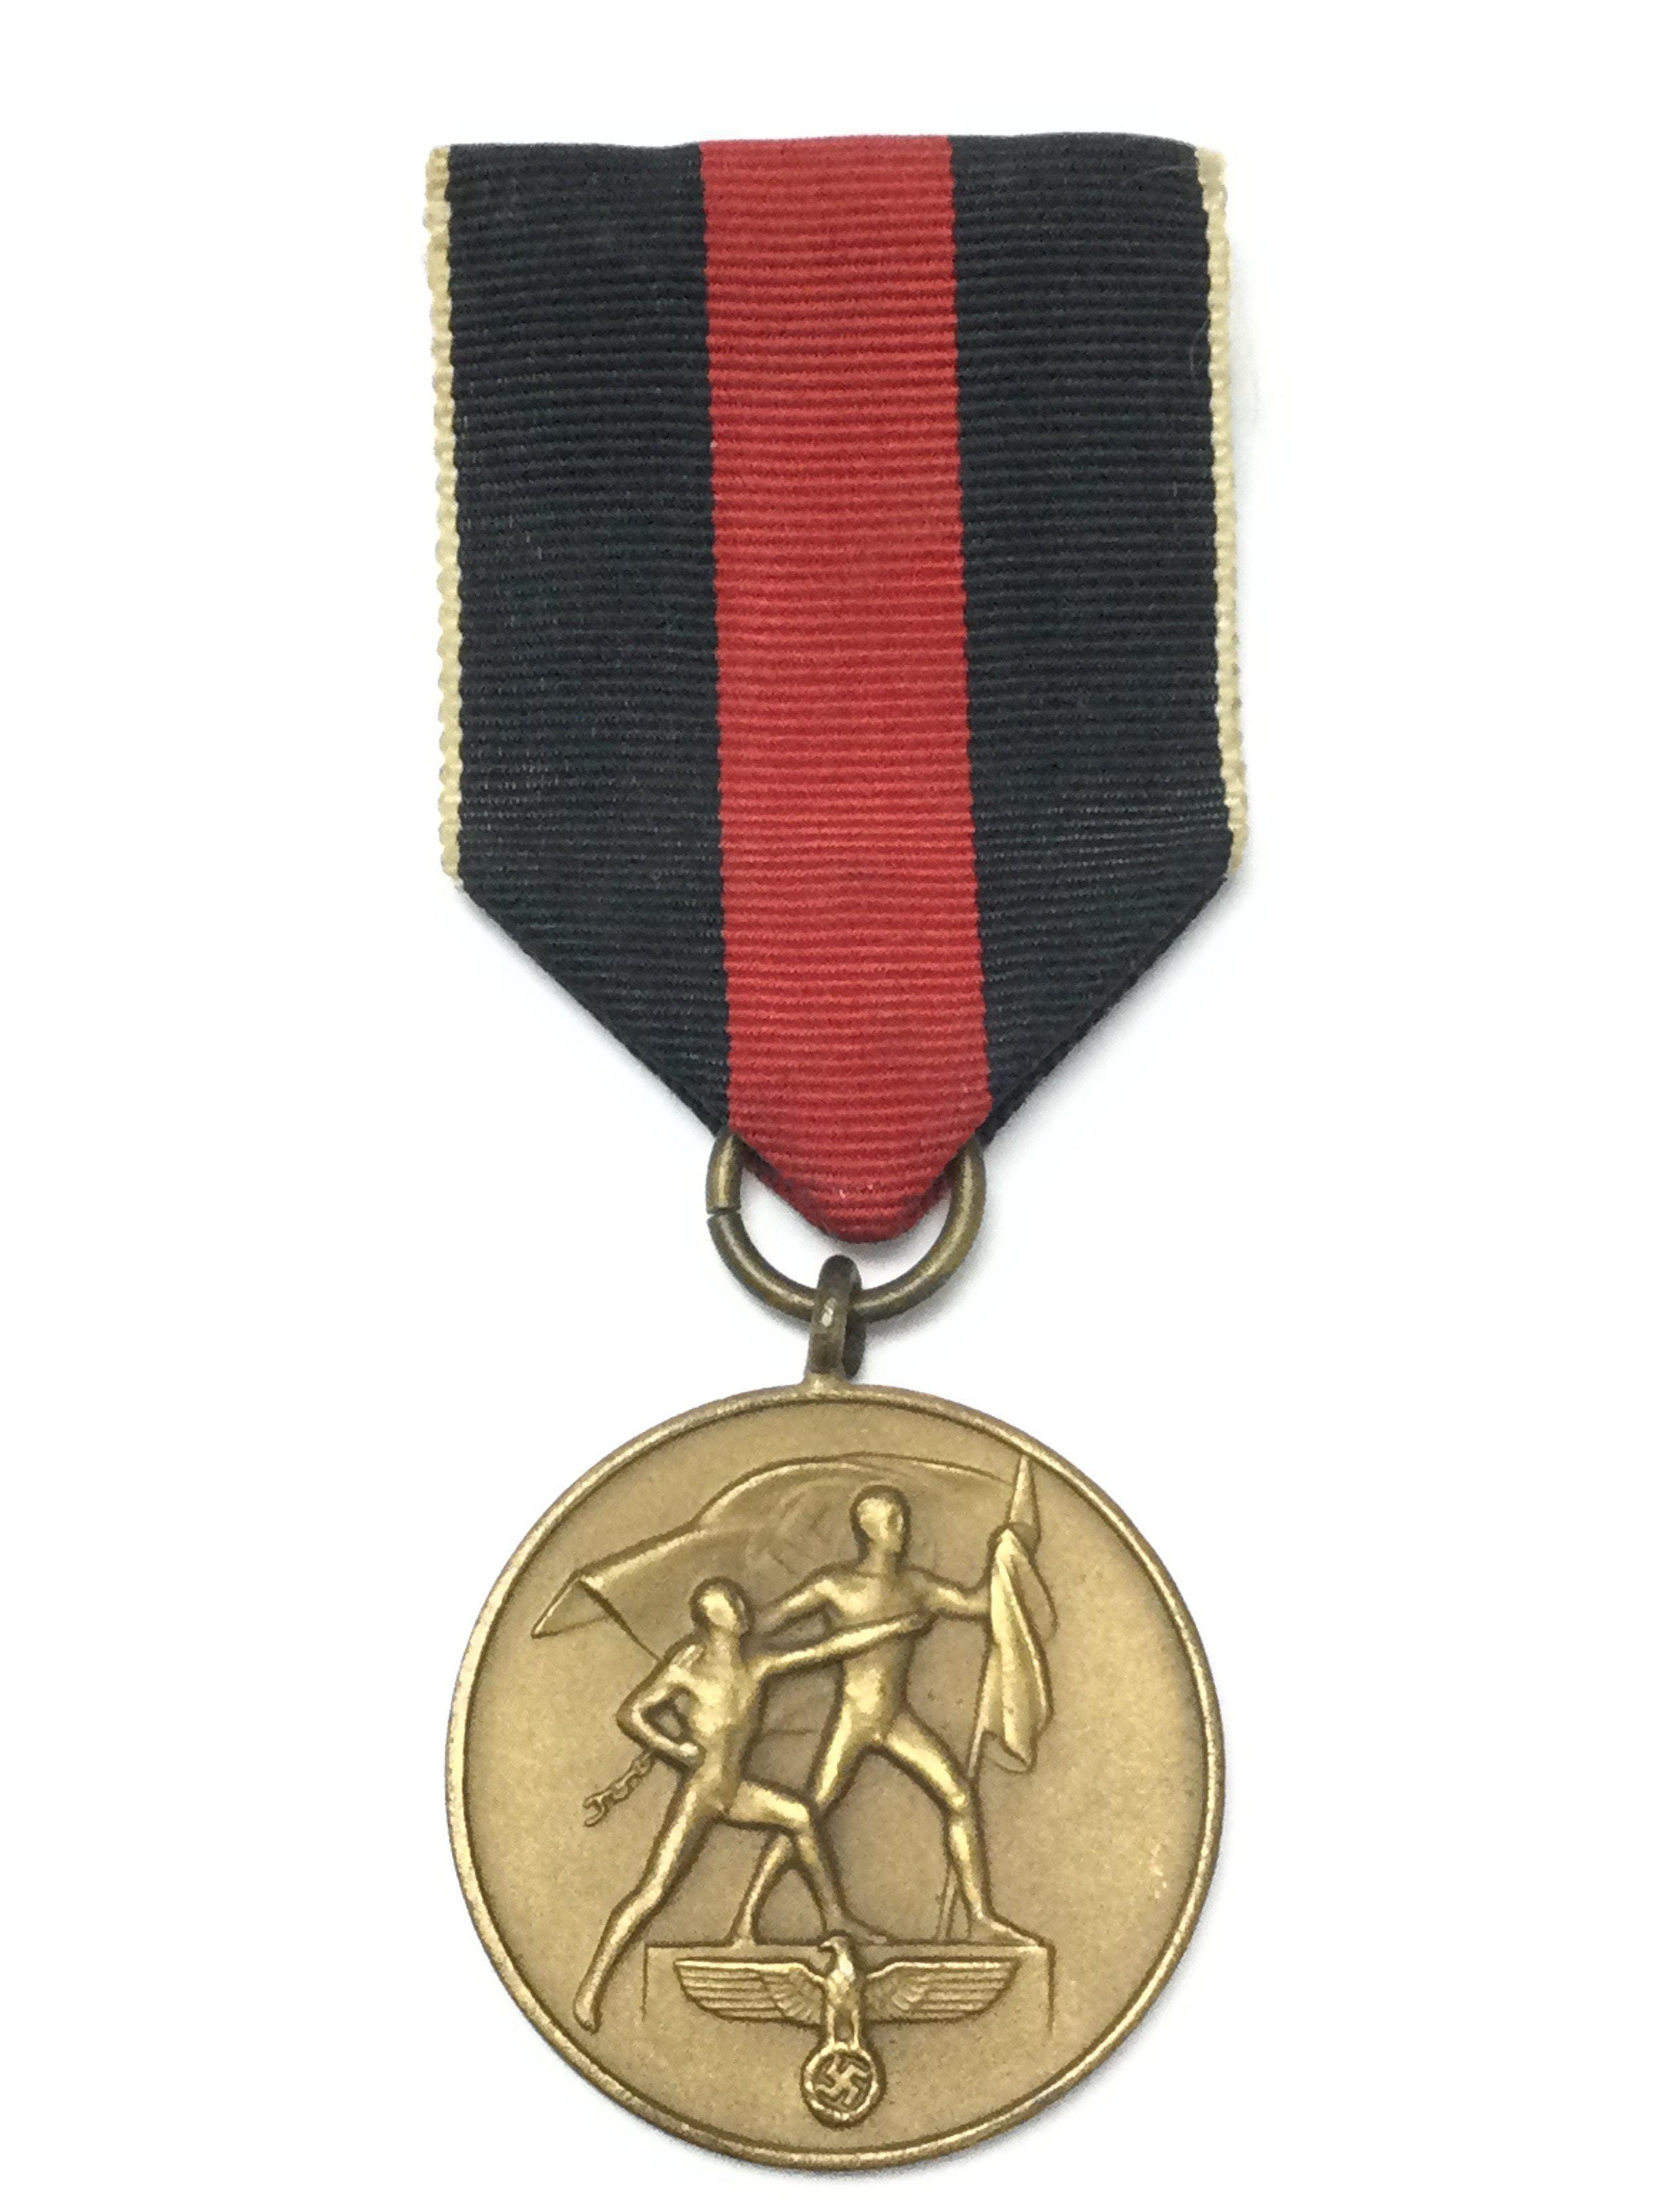 A cased WW2 Third Reich Medal of the Annexation of - Image 4 of 6